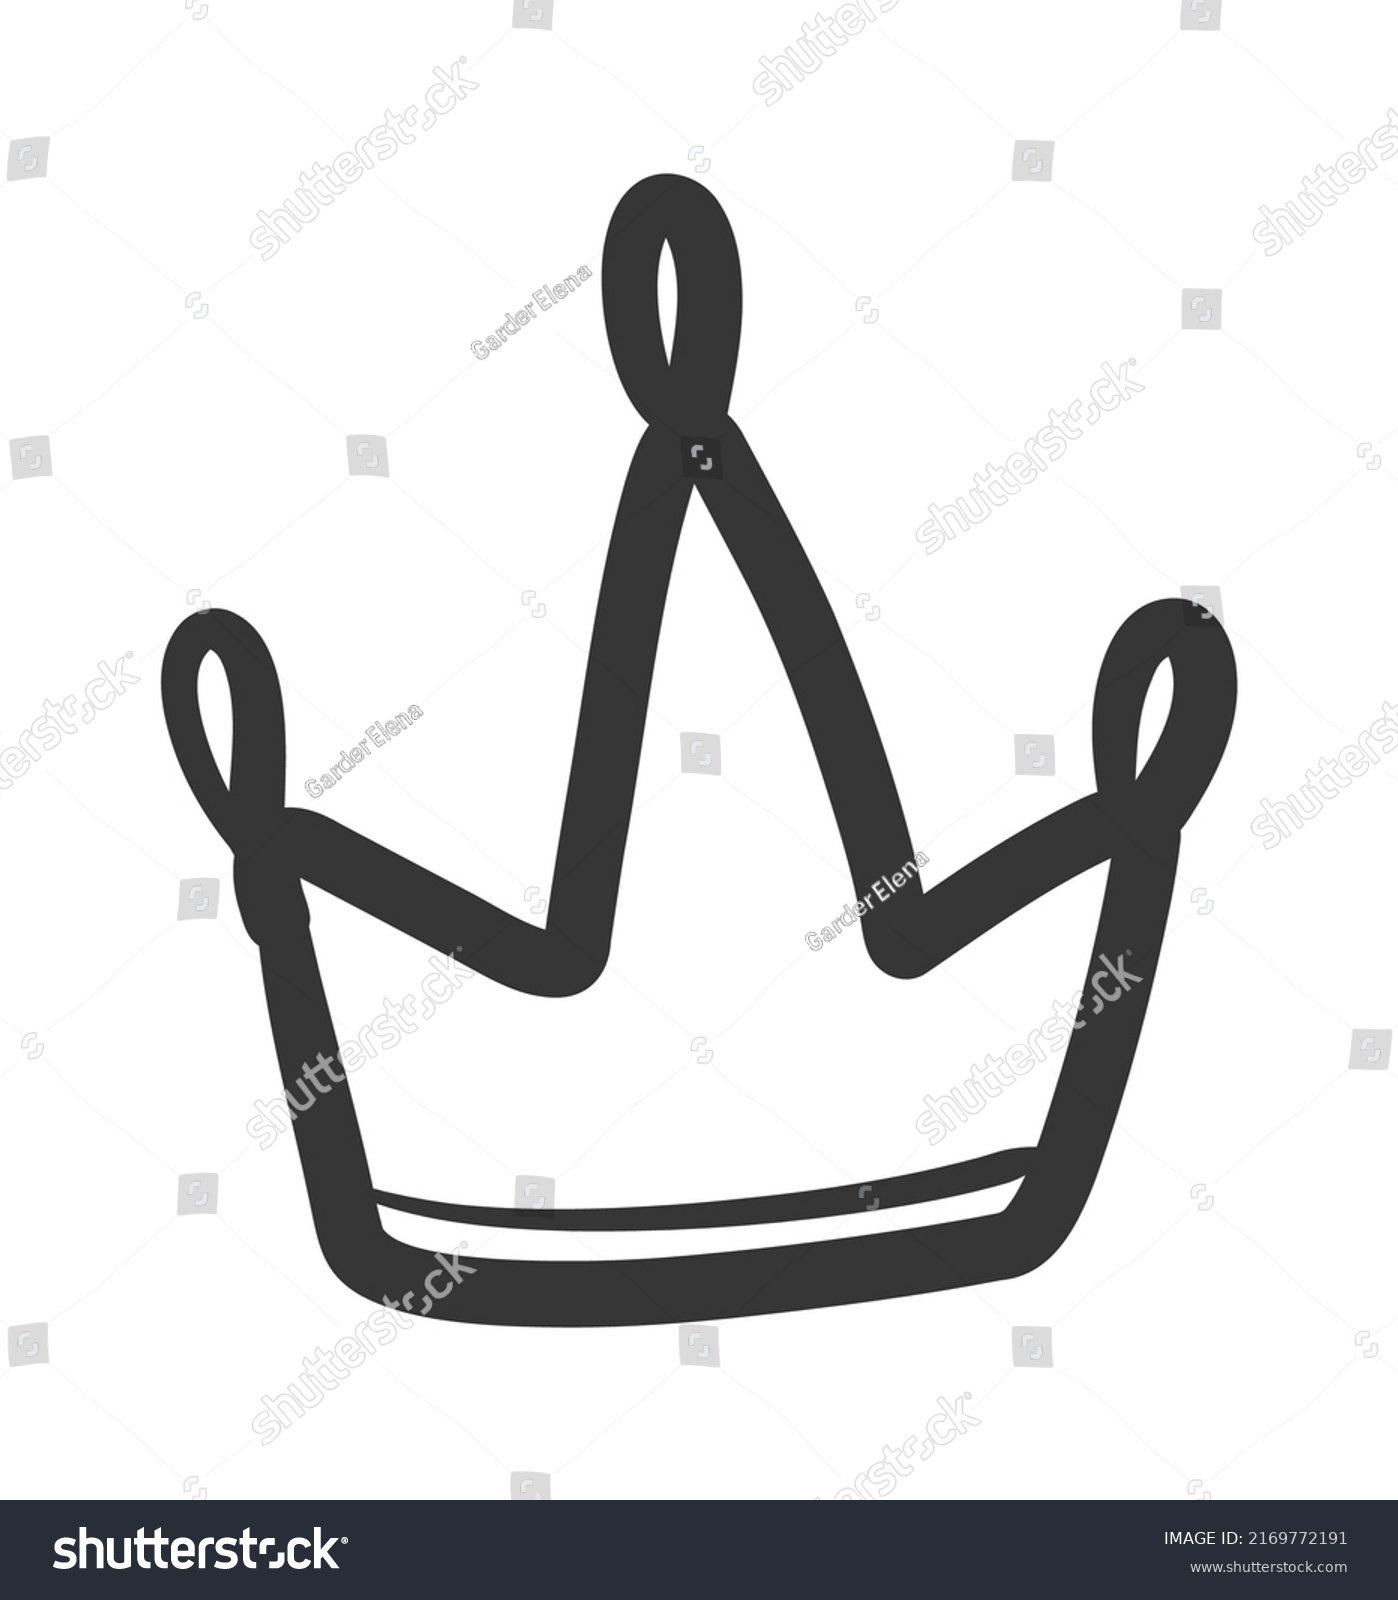 Doodle King Queen Crown Hand Drawn Stock Vector (Royalty Free ...